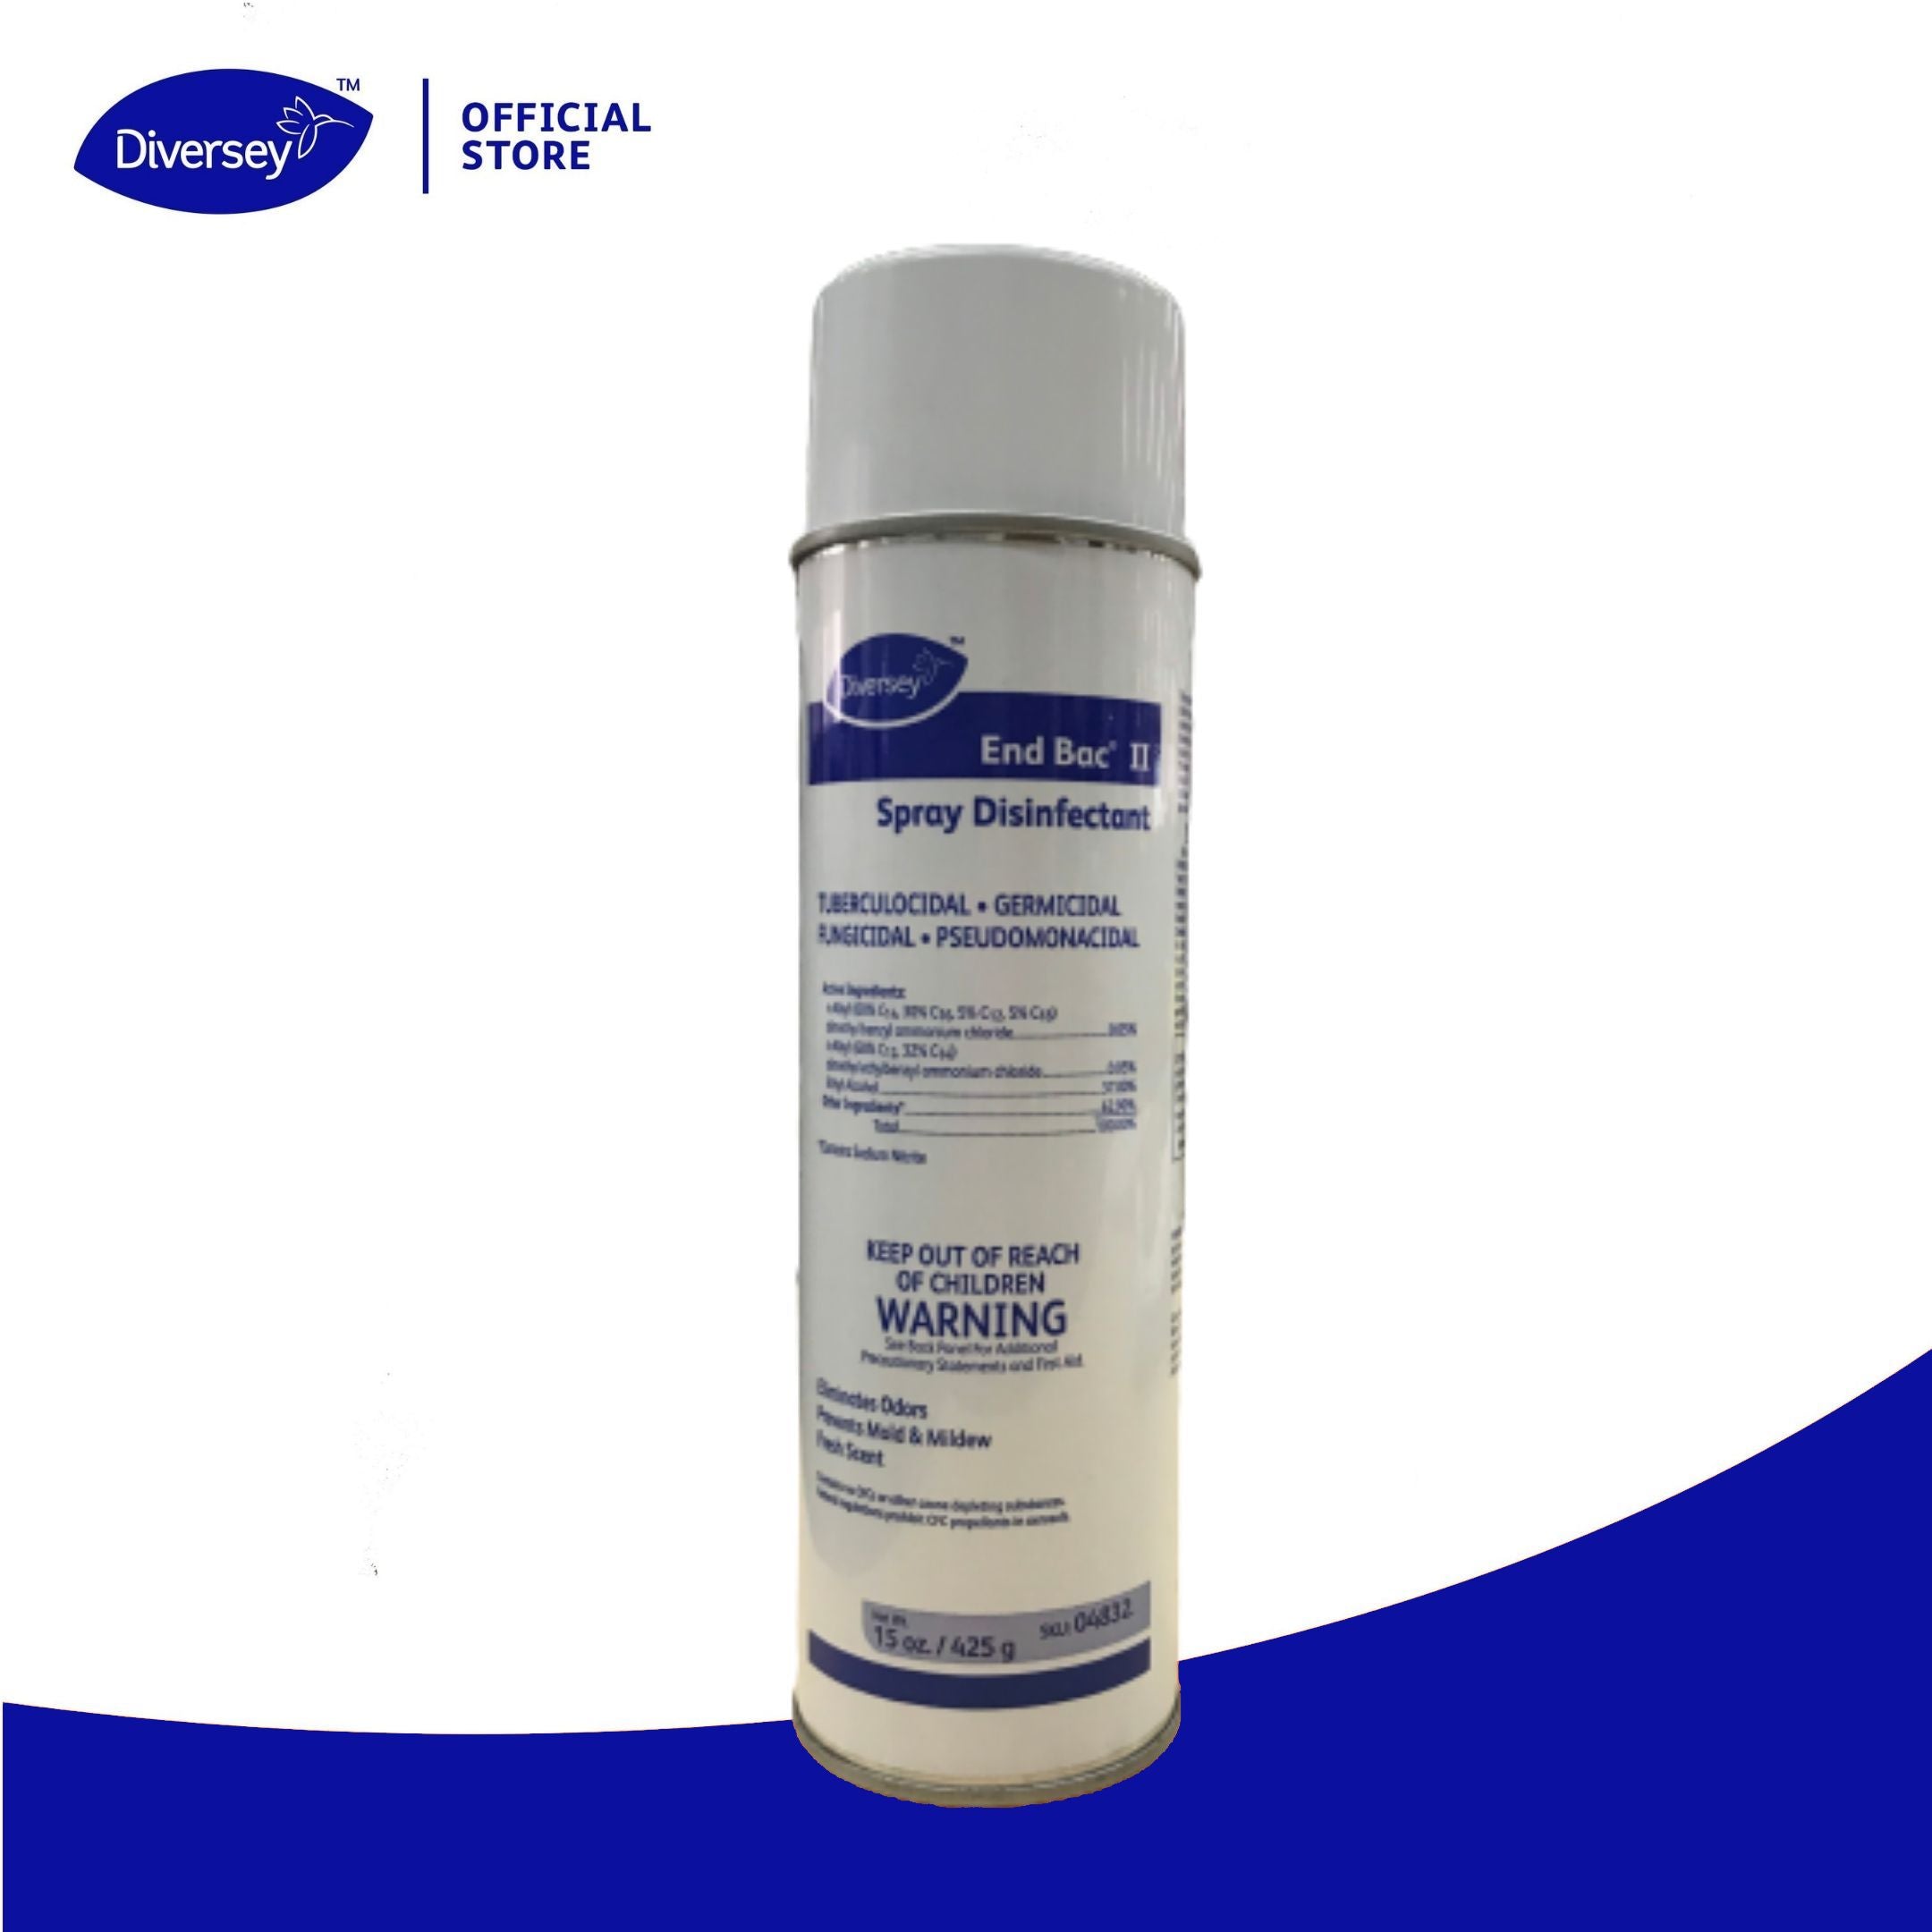 DIVERSEY END BAC II SPRAY DISINFECTANT 15 OZ